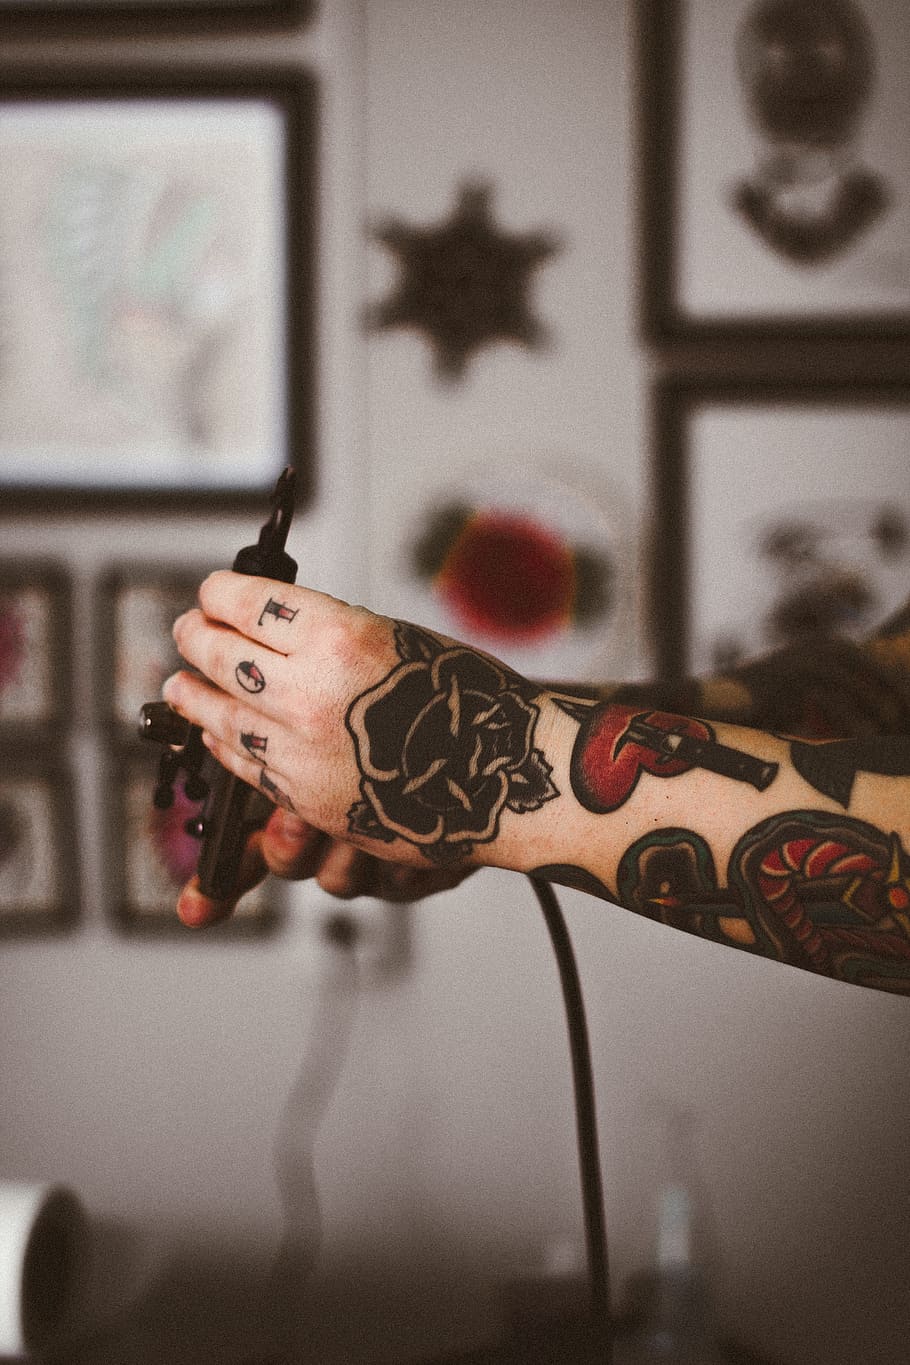 hand, arm, body, tattoo, indoors, focus on foreground, one person, real people, human hand, lifestyles